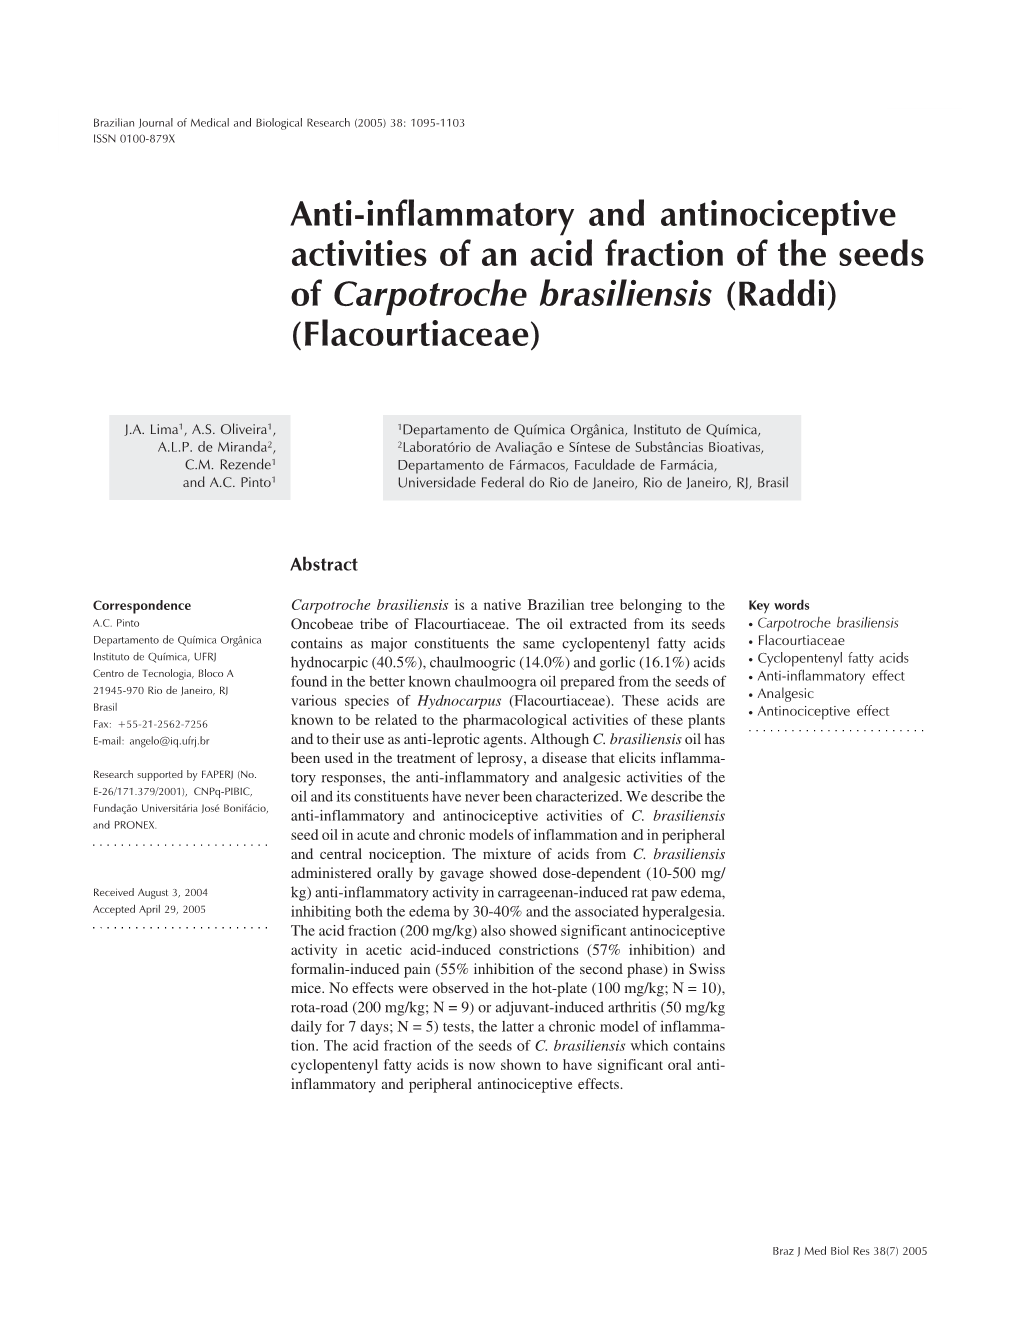 Anti-Inflammatory and Antinociceptive Activities of an Acid Fraction of the Seeds of Carpotroche Brasiliensis (Raddi) (Flacourtiaceae)